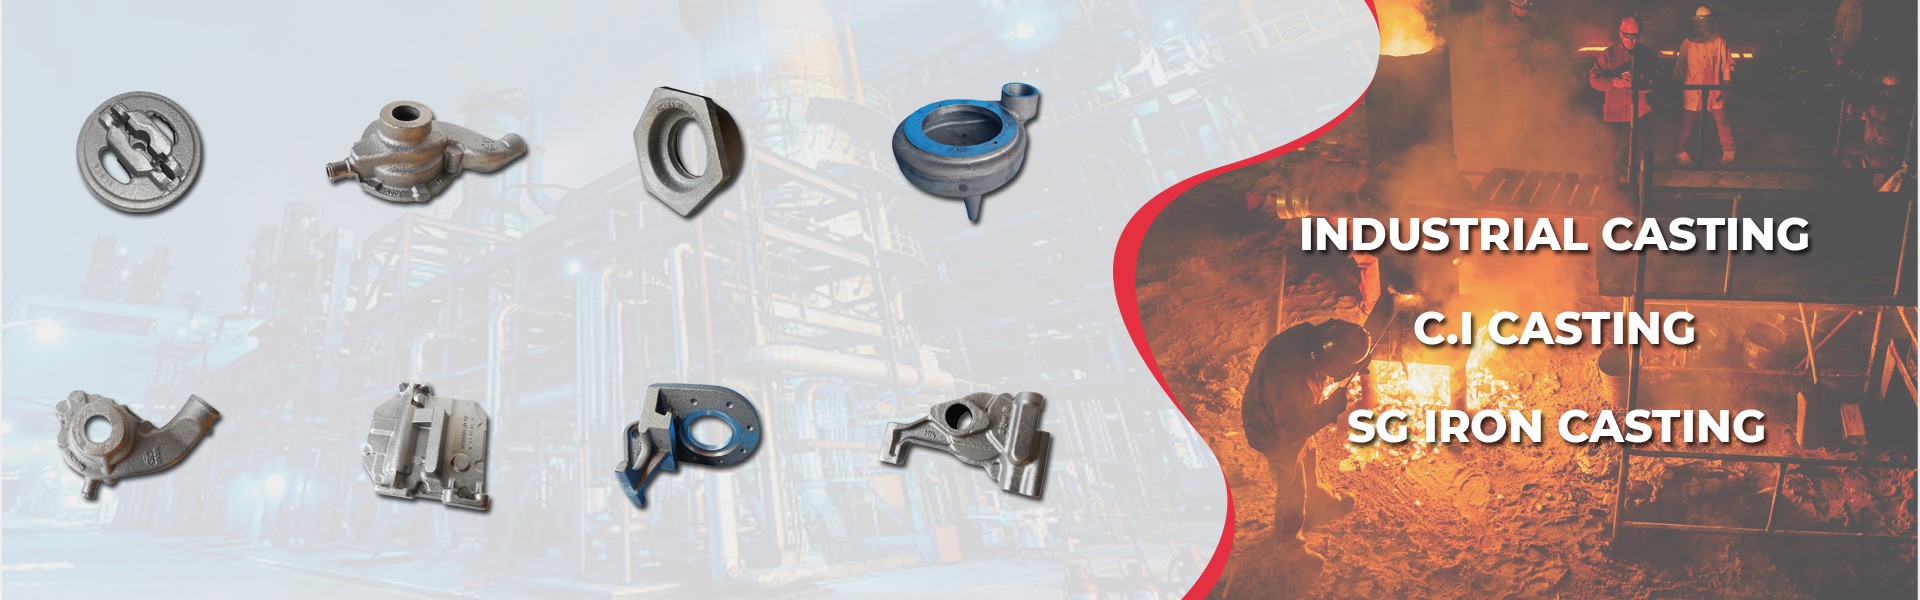 C.I. Castings, S.G. Iron Castings, Precision Machined Components, Automobile Castings, Cast Iron Castings